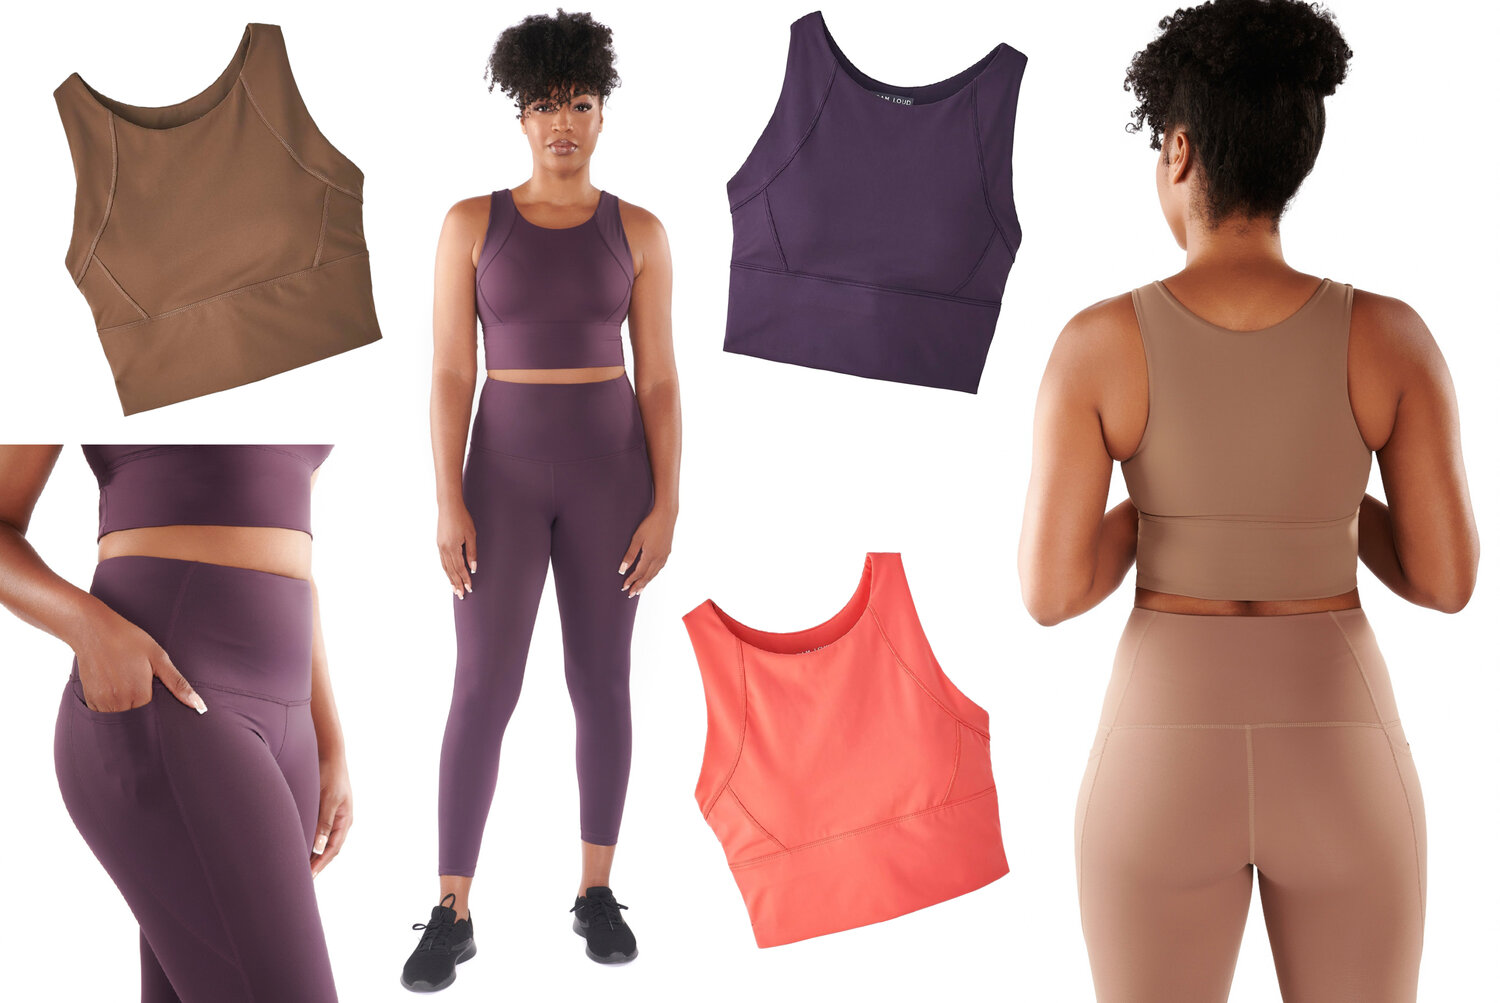 SHOP: See Why this PVD-Based Athleisure Brand is One of Oprah's Favorite  Things